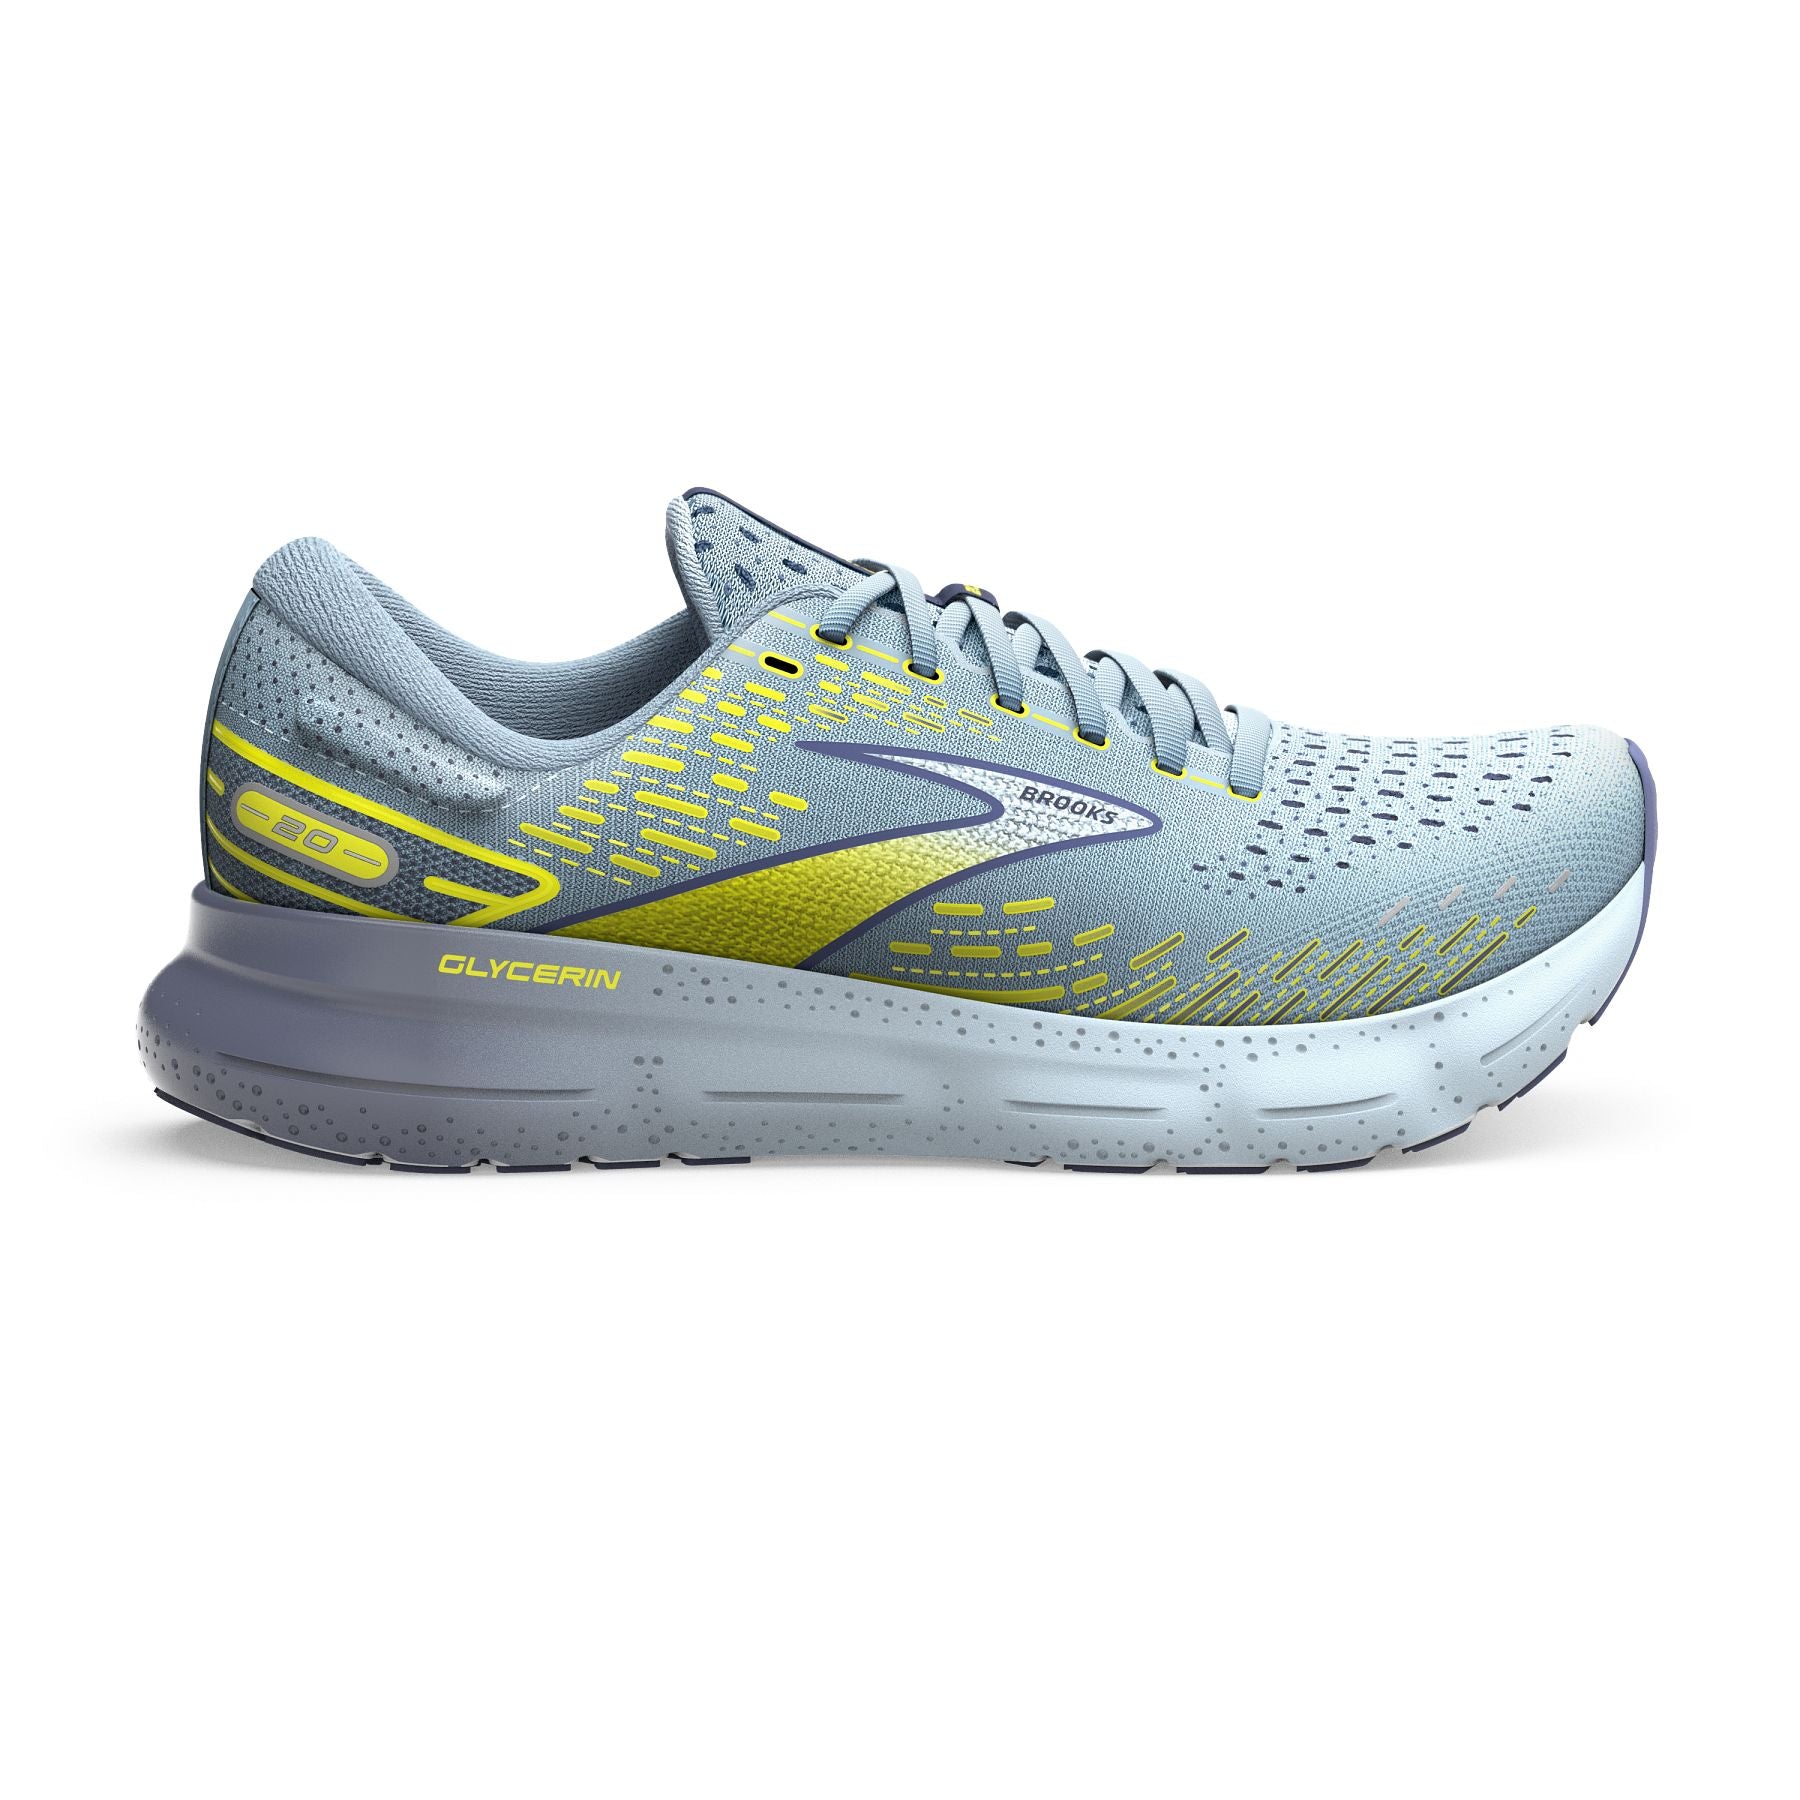 Lateral view of the Men's Glycerin 20 by Brook's in the color Blue/Crown Blue/Sulphur